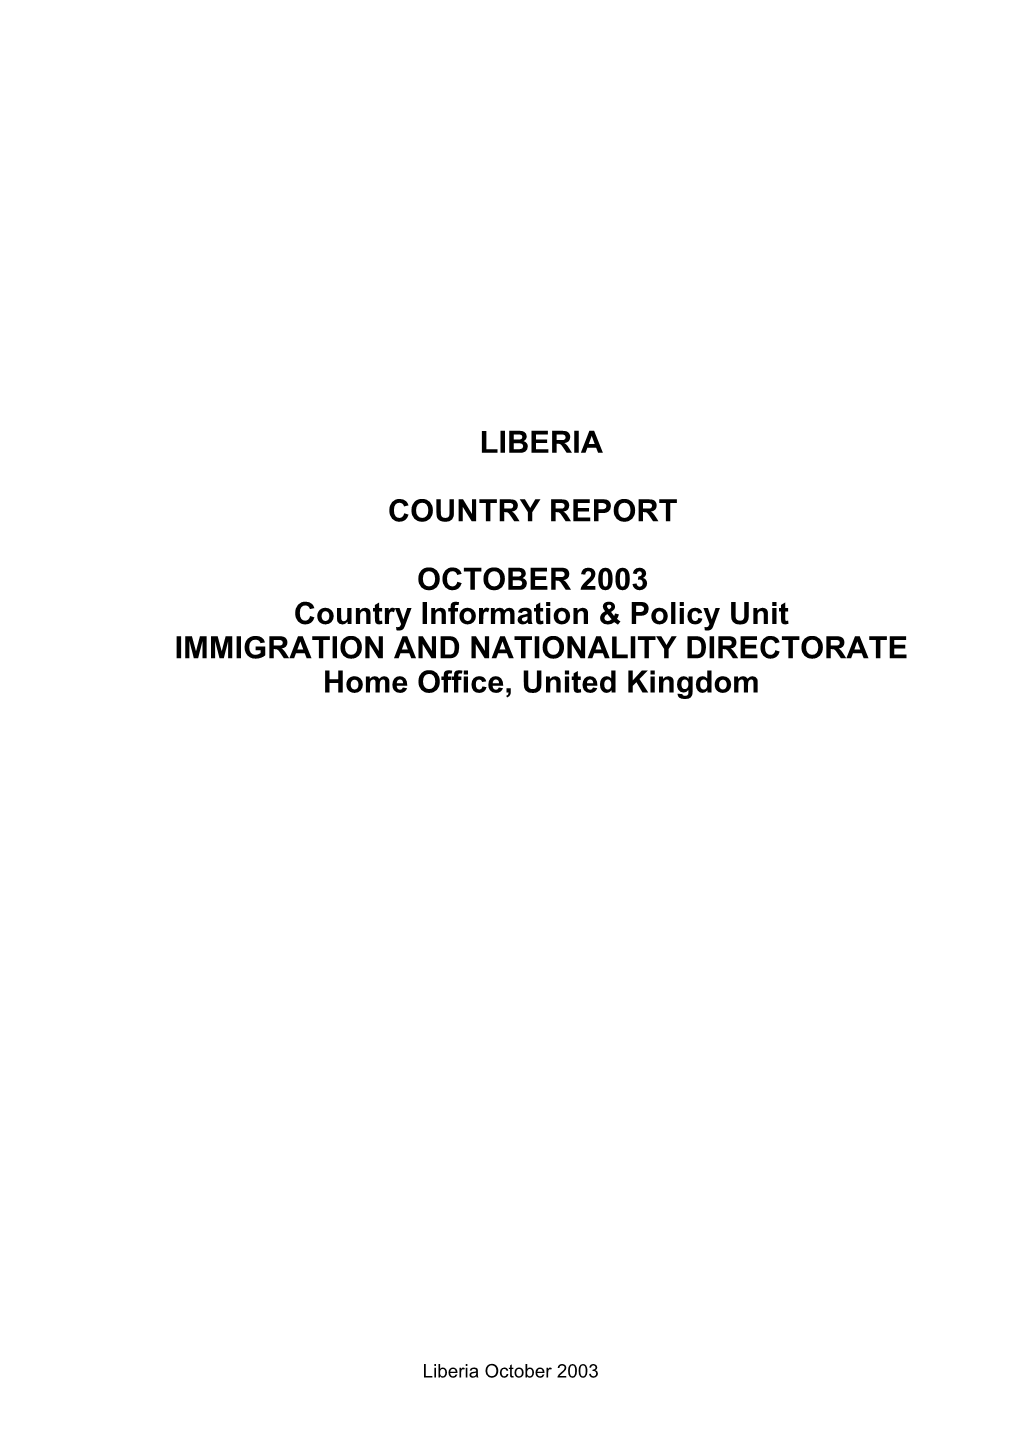 LIBERIA COUNTRY REPORT OCTOBER 2003 Country